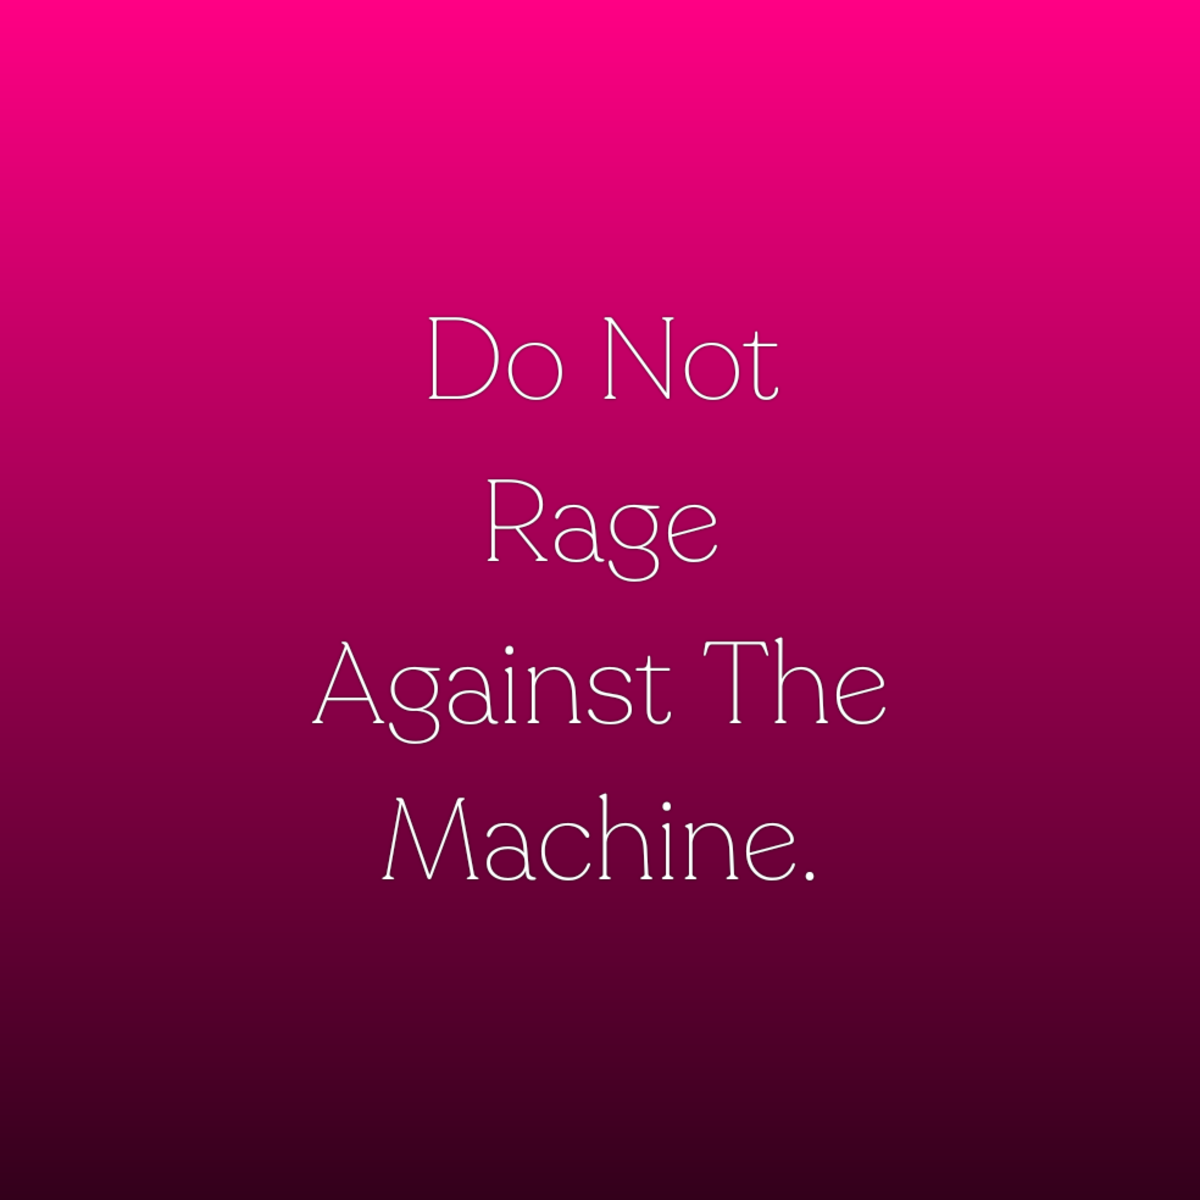 Do Not Rage Against The Machine.